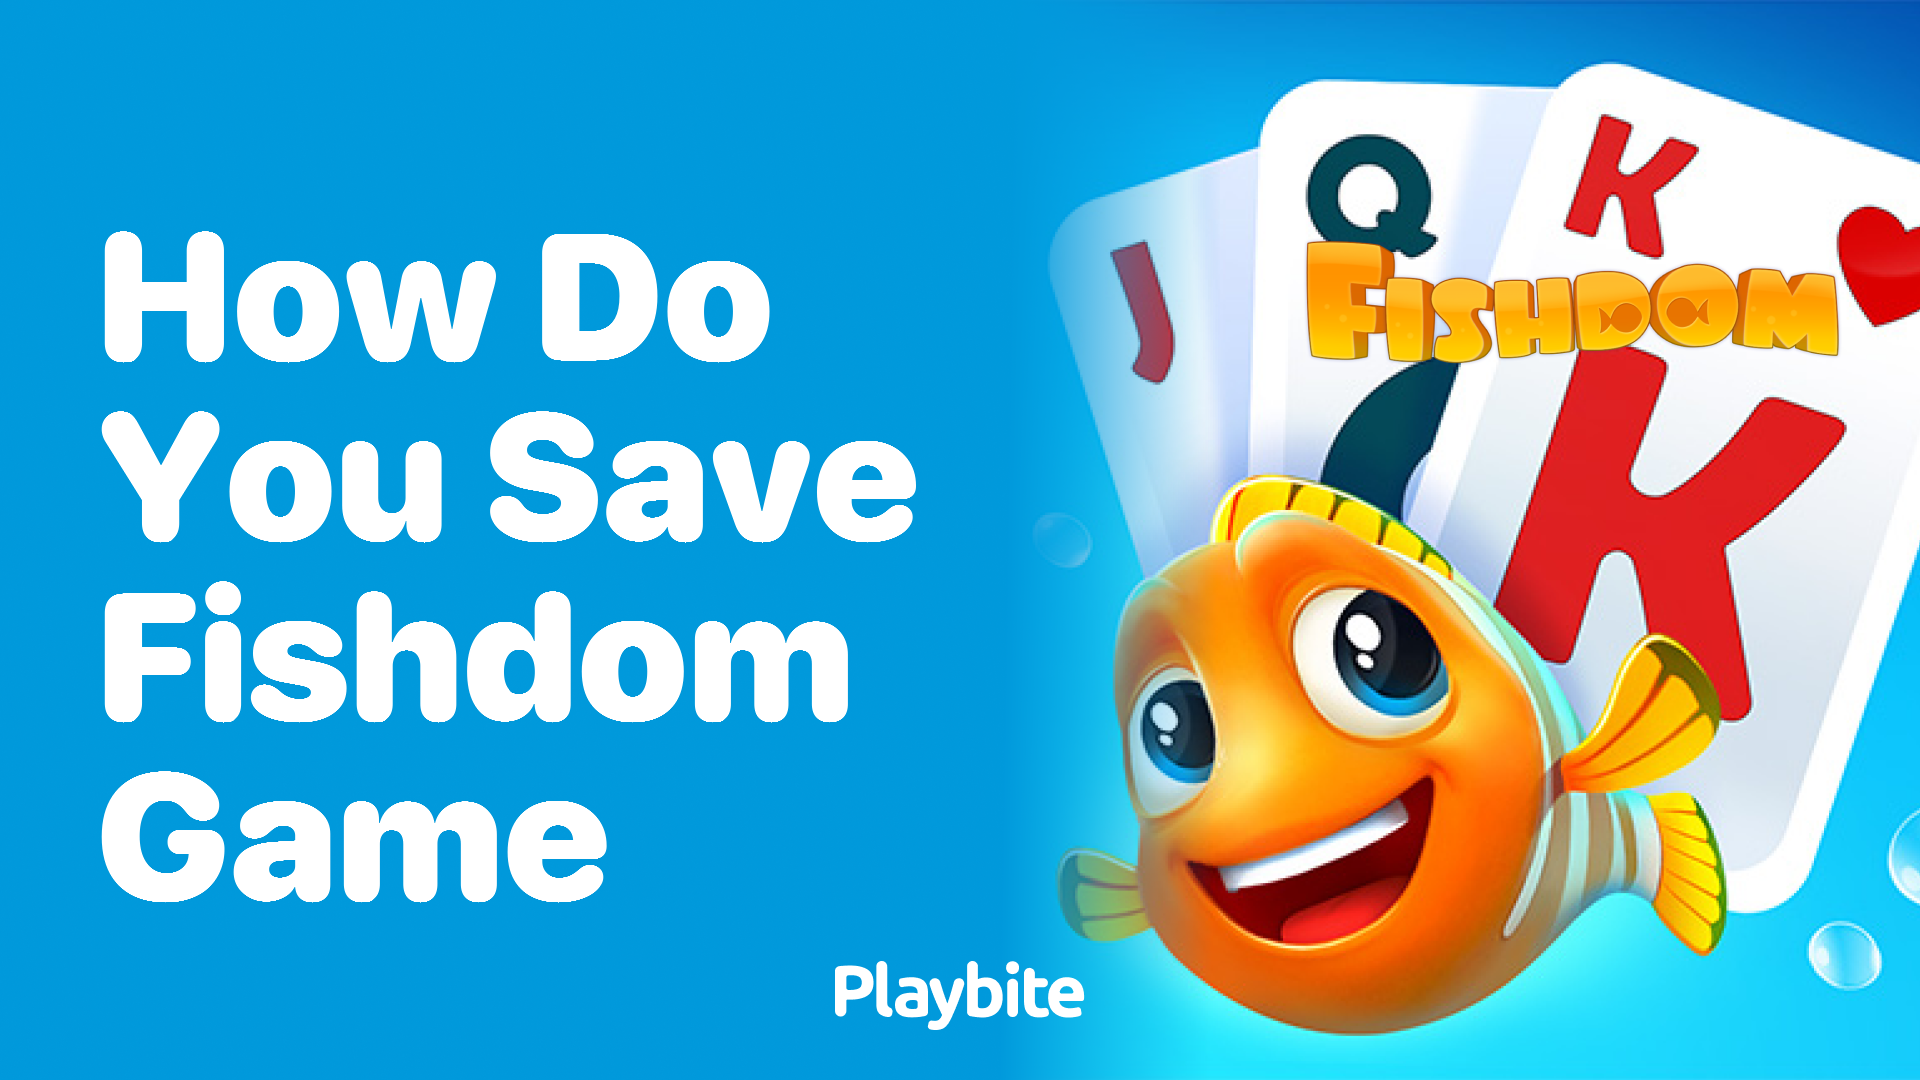 How Do You Save Your Game in Fishdom?